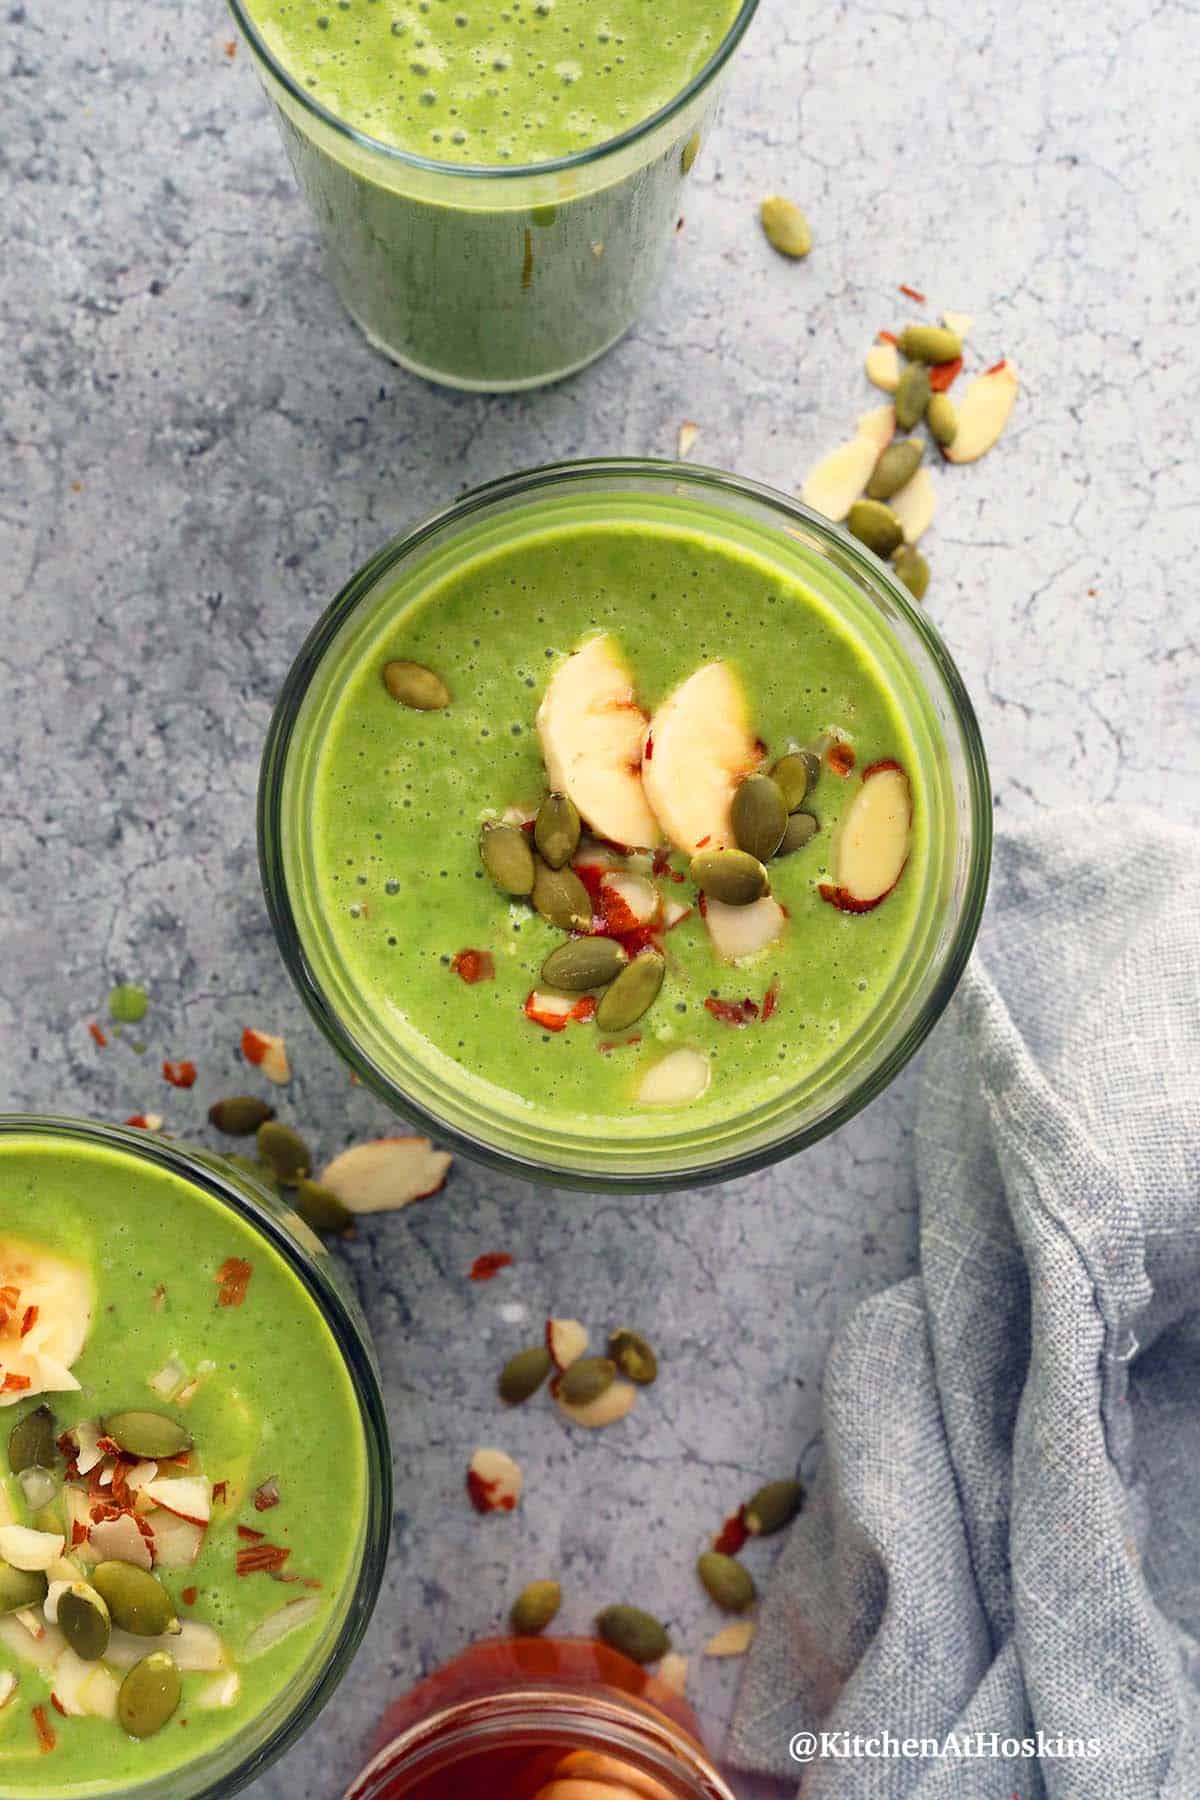 spinach smoothie topped with sliced banana and nuts.